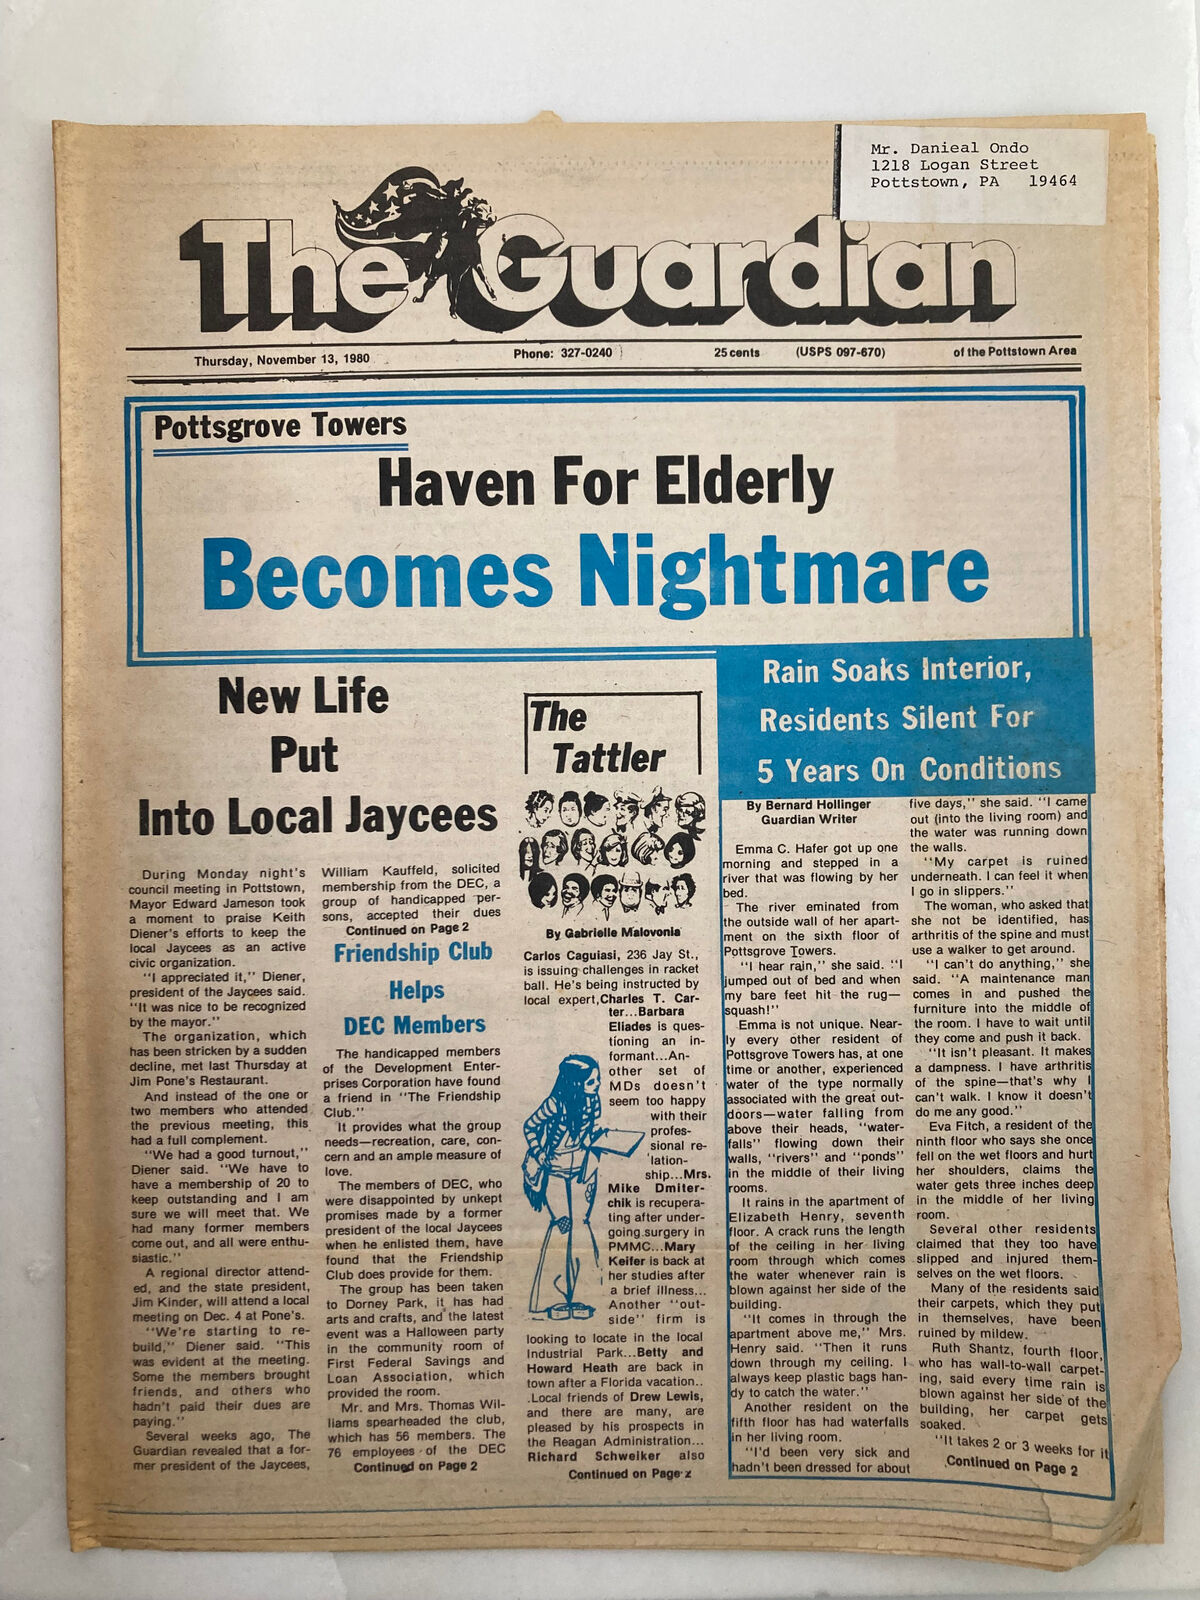 The Guardian Newspaper November 13 1980 Haven for Elderly Becomes Nightmare